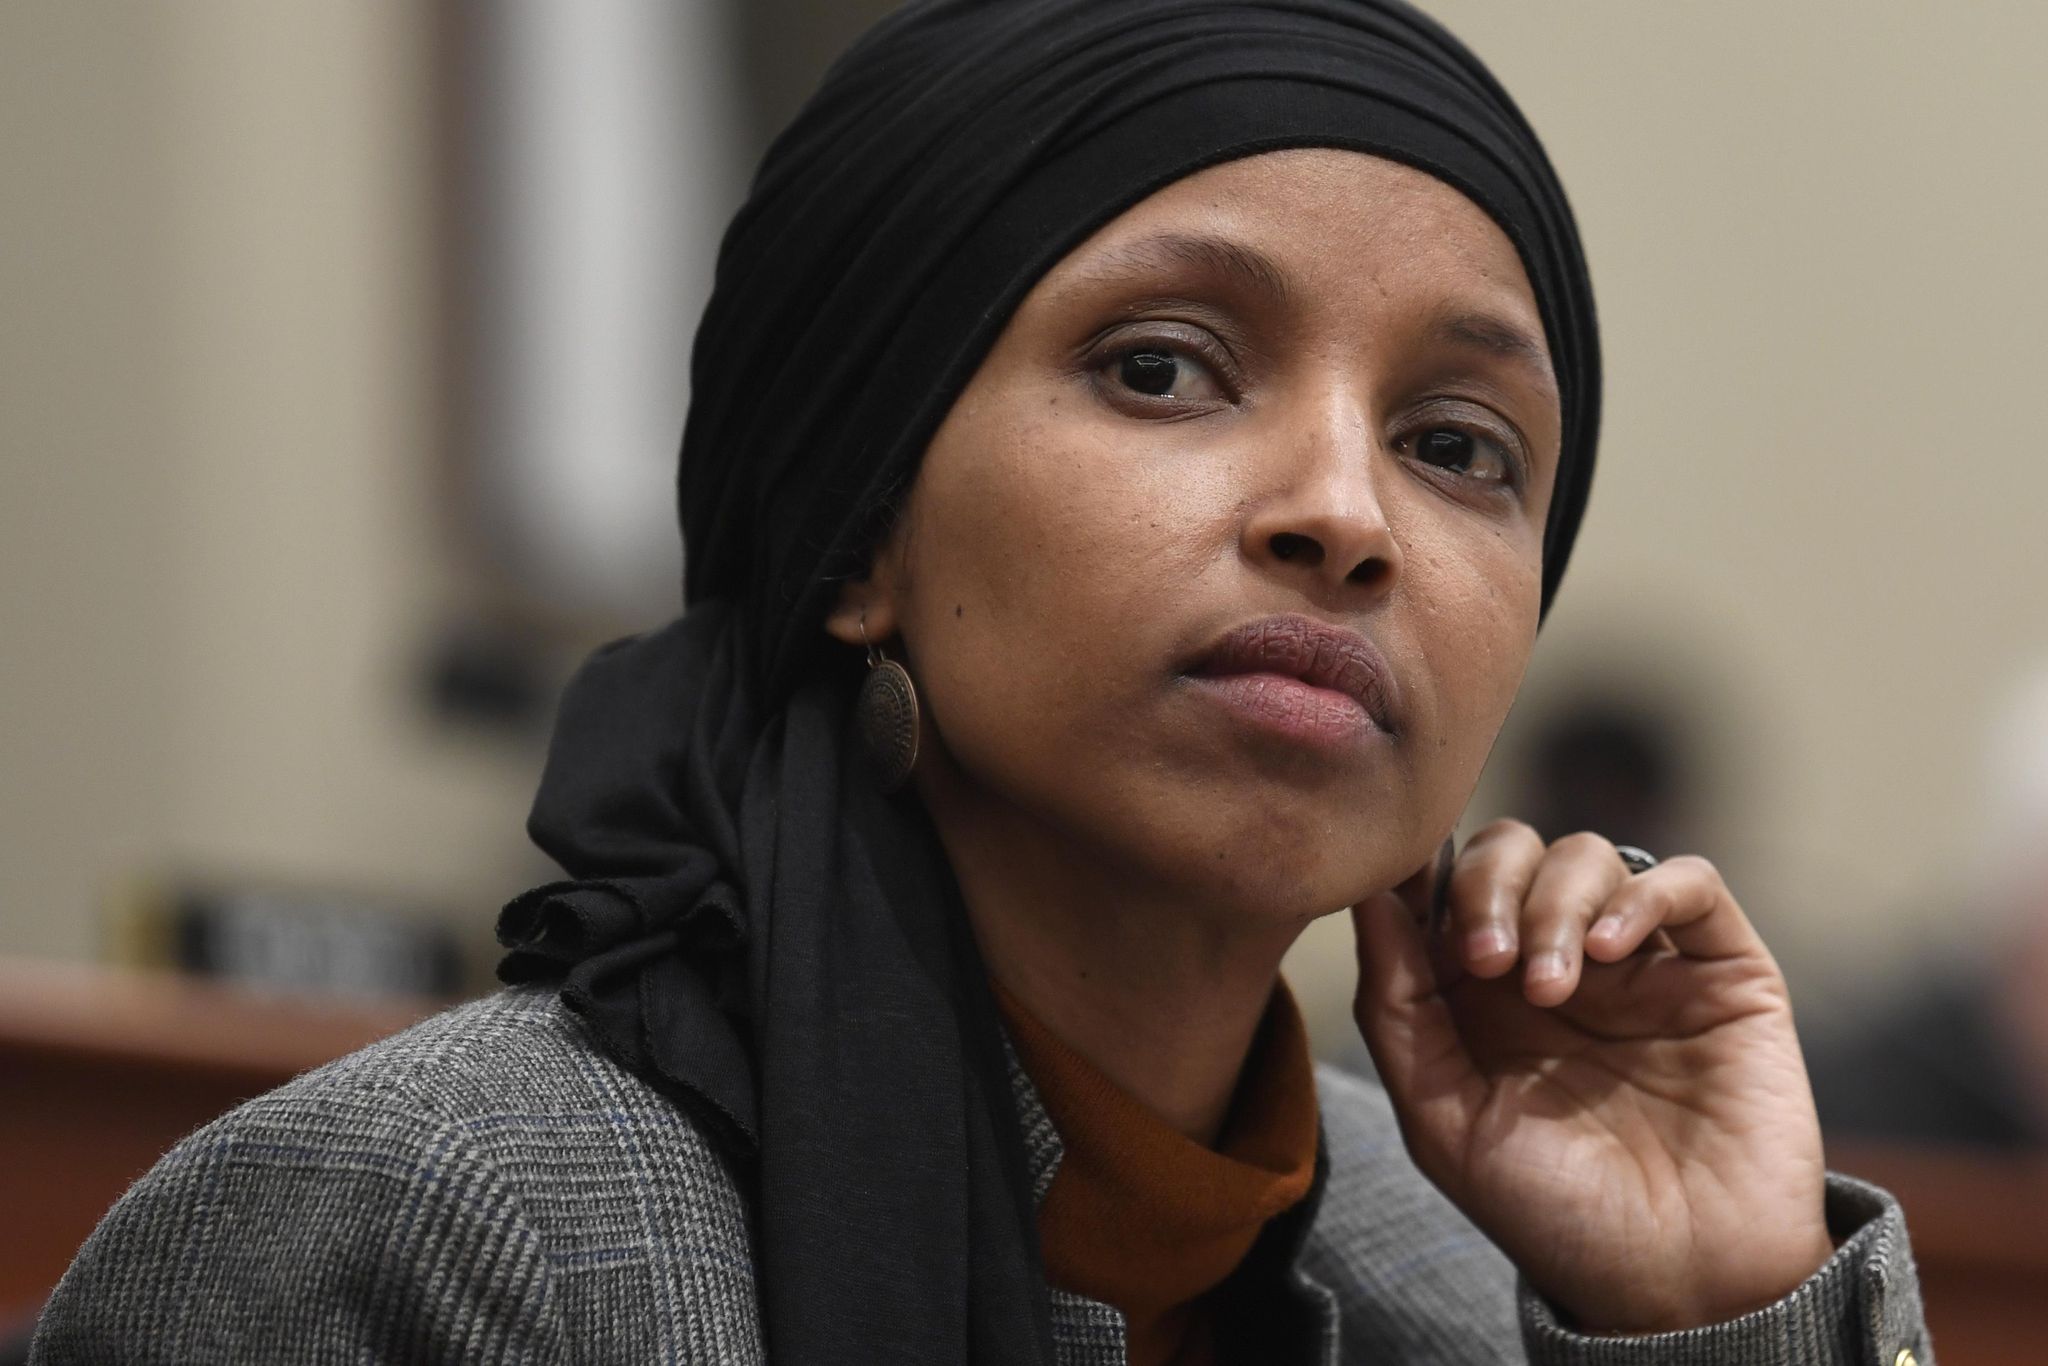 Ilhan Omar calls Republicans 'goons' in speech outside Capitol - Washington Times